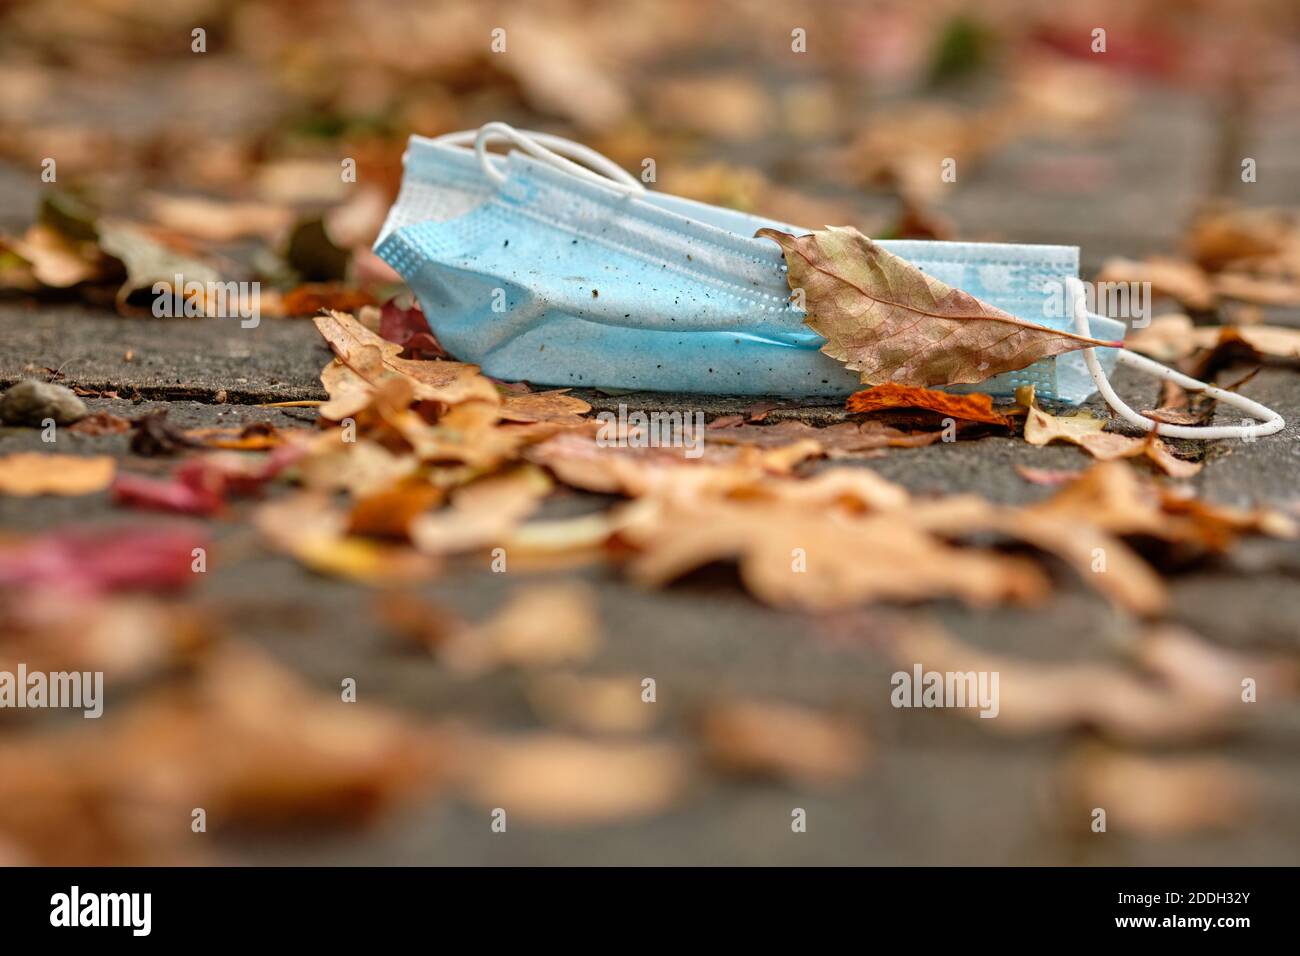 A thrown away dirty disposable face mask lying on the pavement under autumn leaves. Seen in Germany in October during corona crisis. Stock Photo